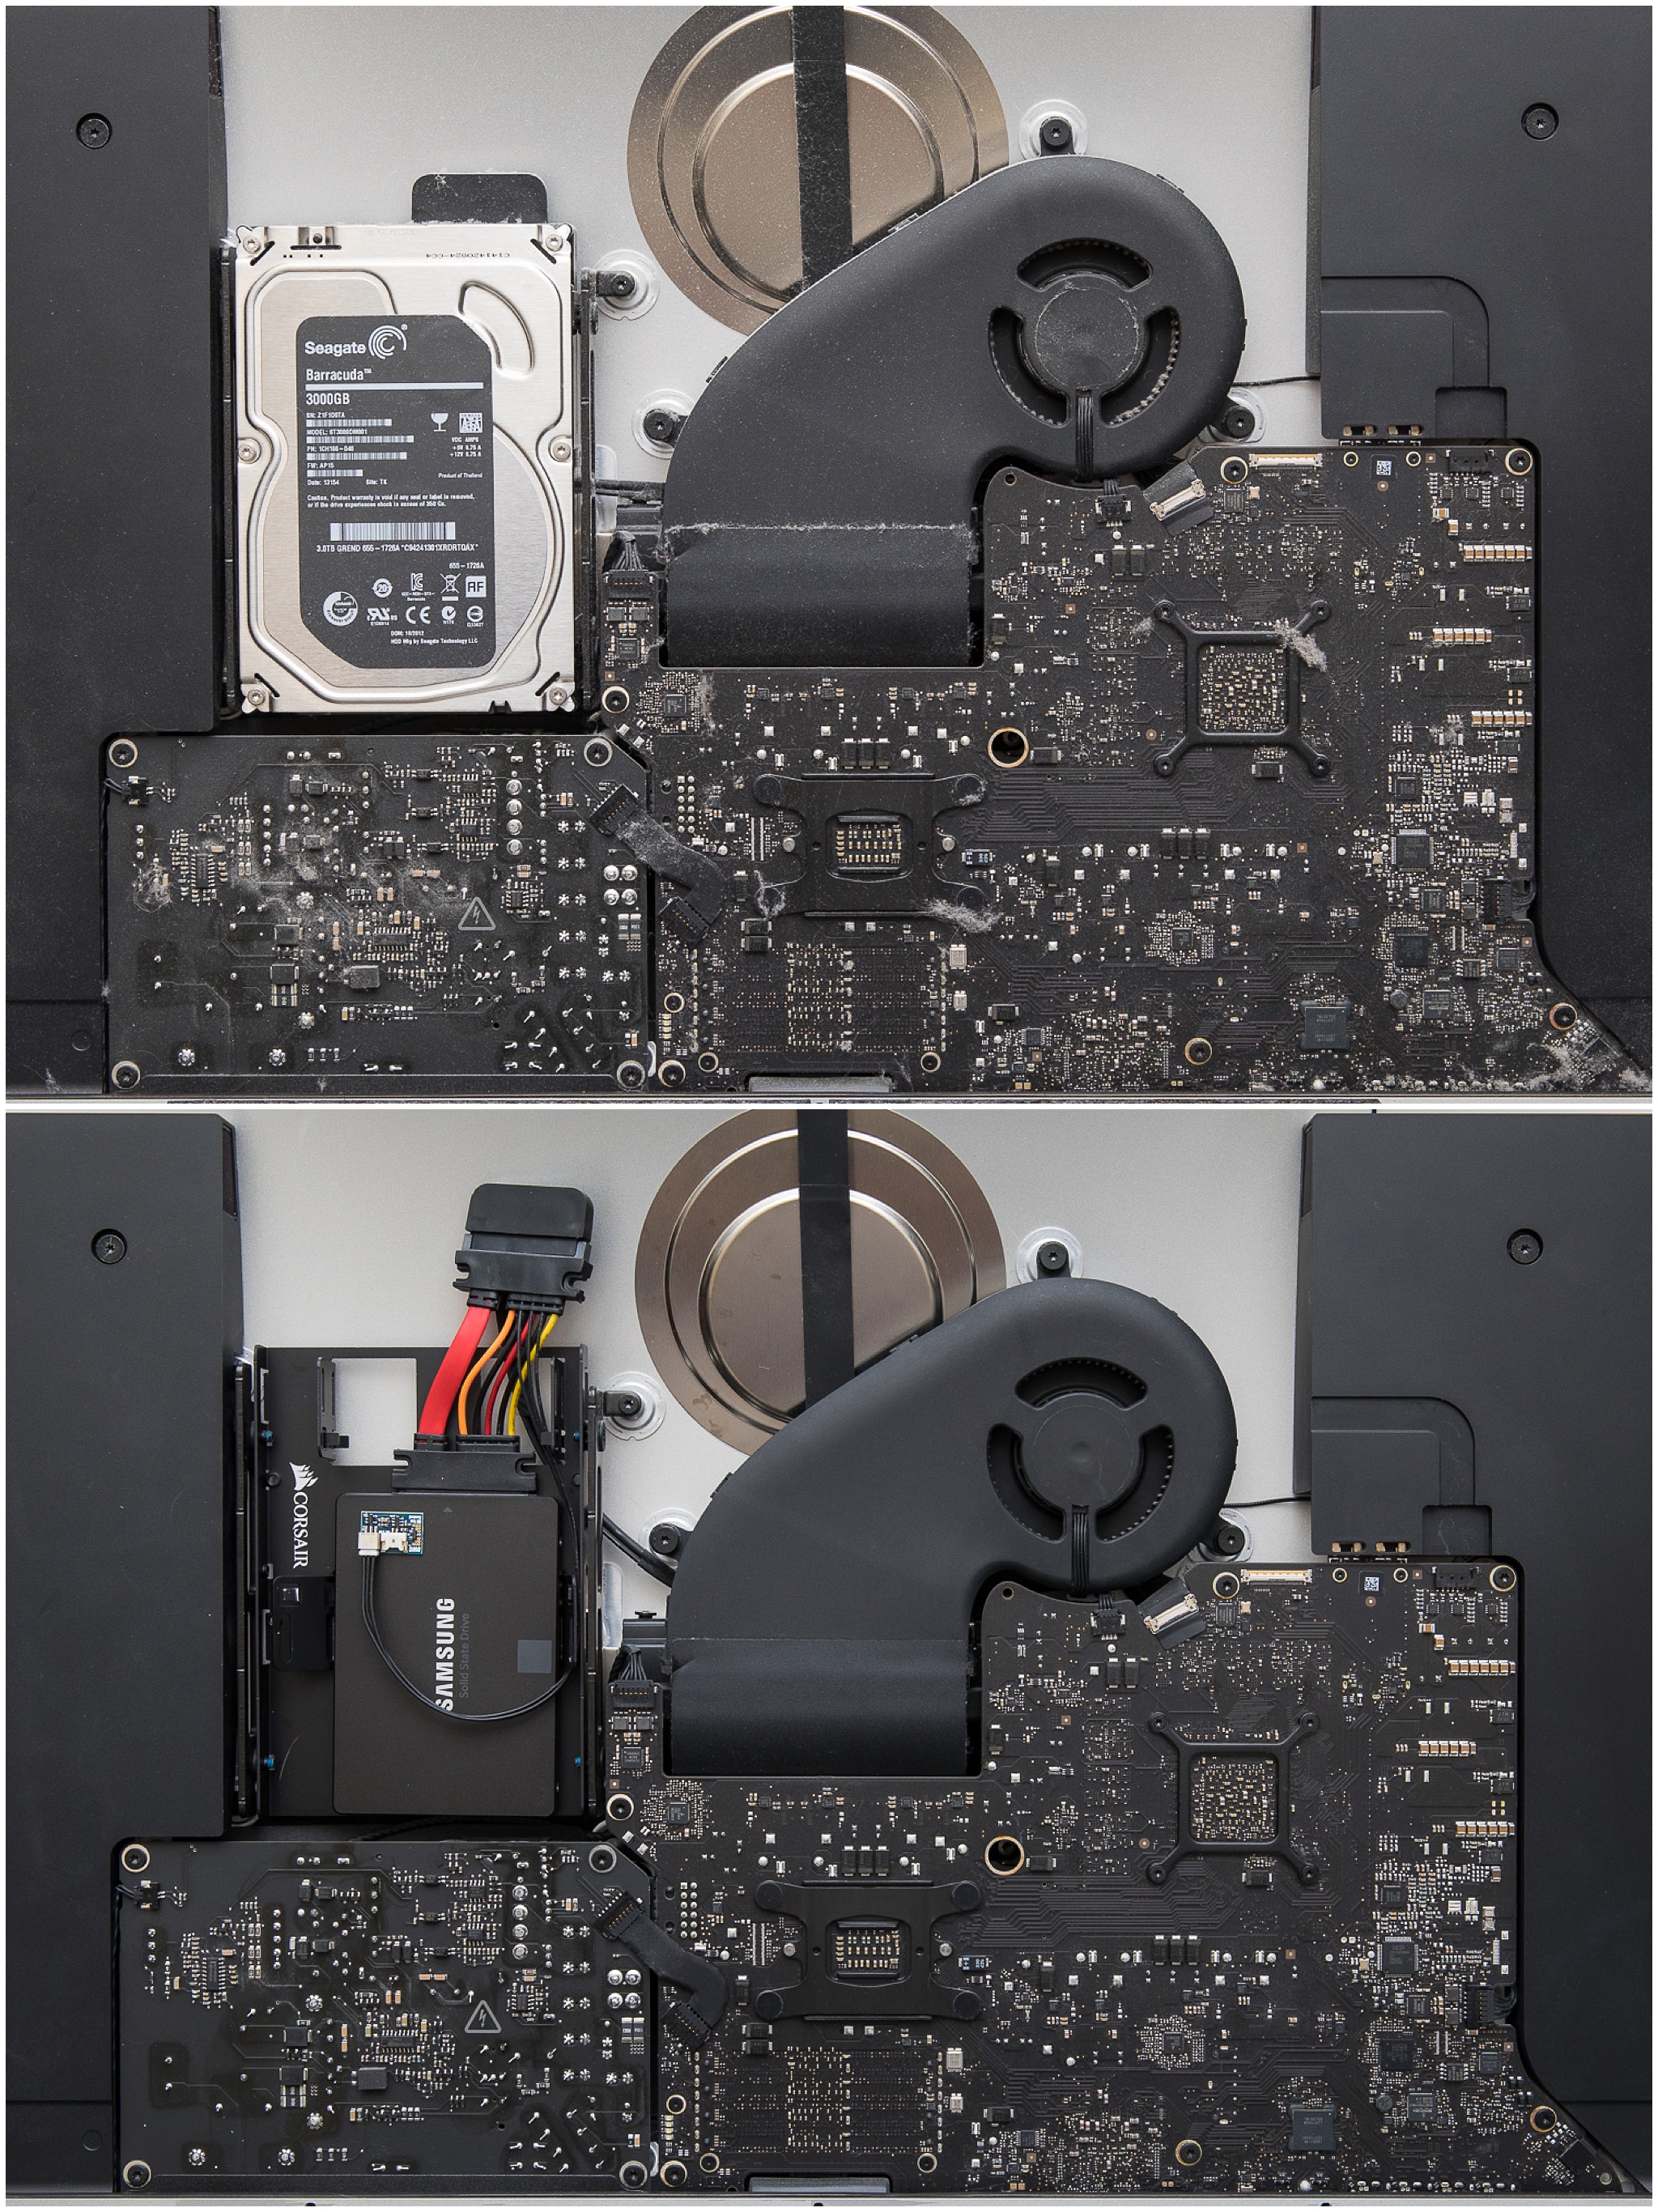 iMac replacement Fusion or SSD? | MacRumors Forums